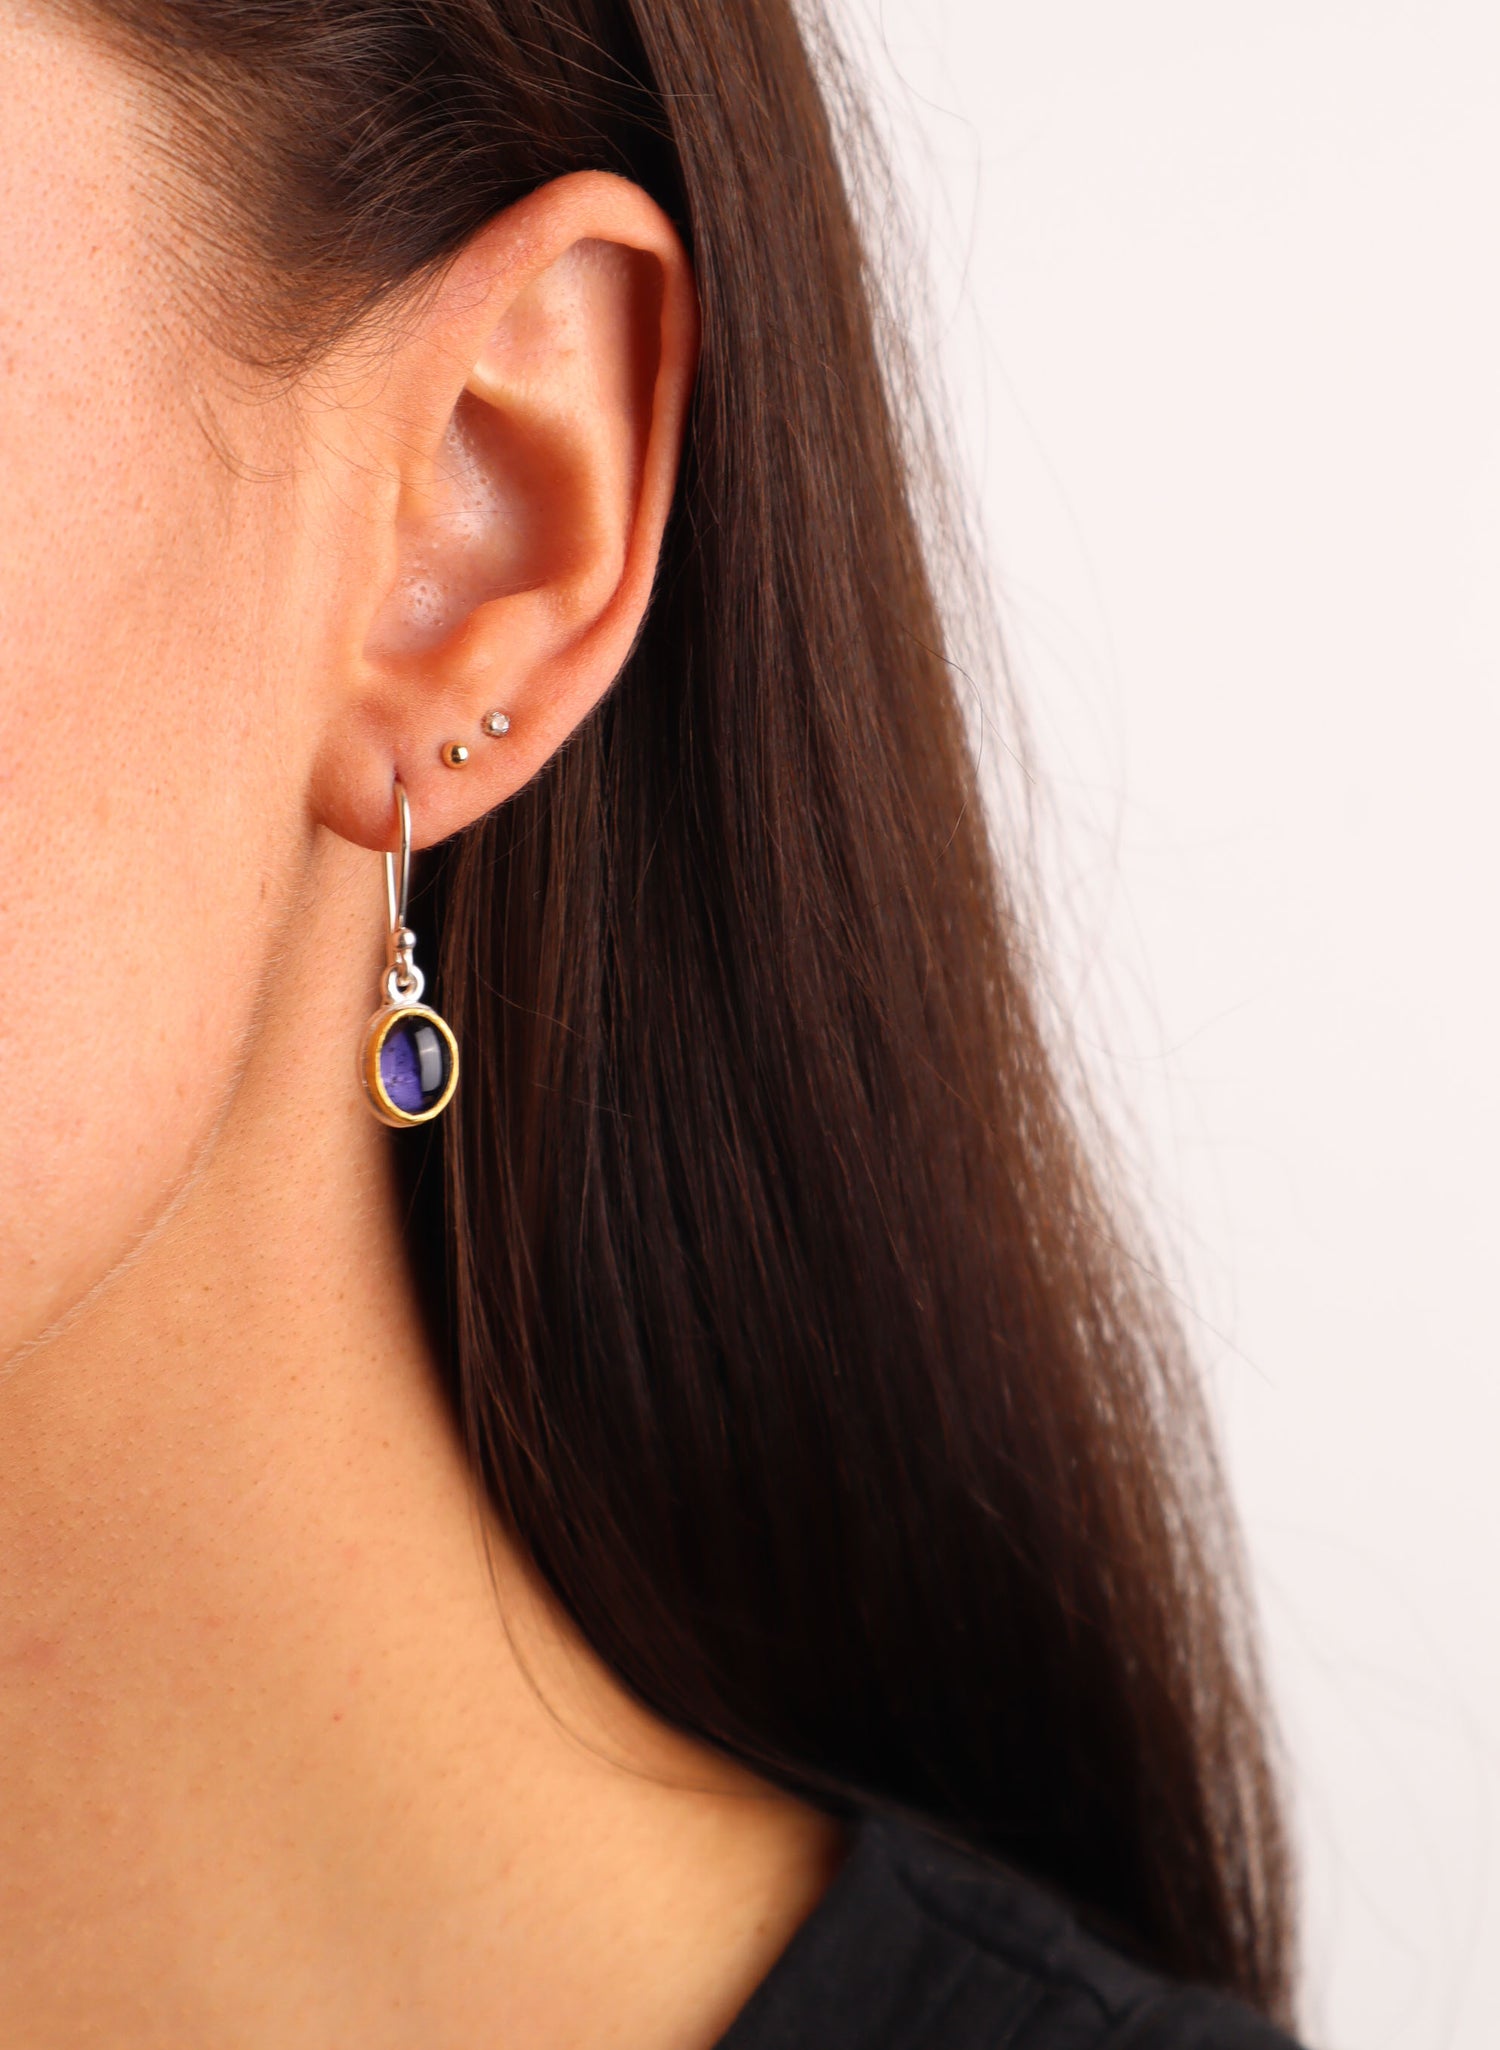 Oval Iolite Drop Earrings - Sterling Silver and 22ct Gold